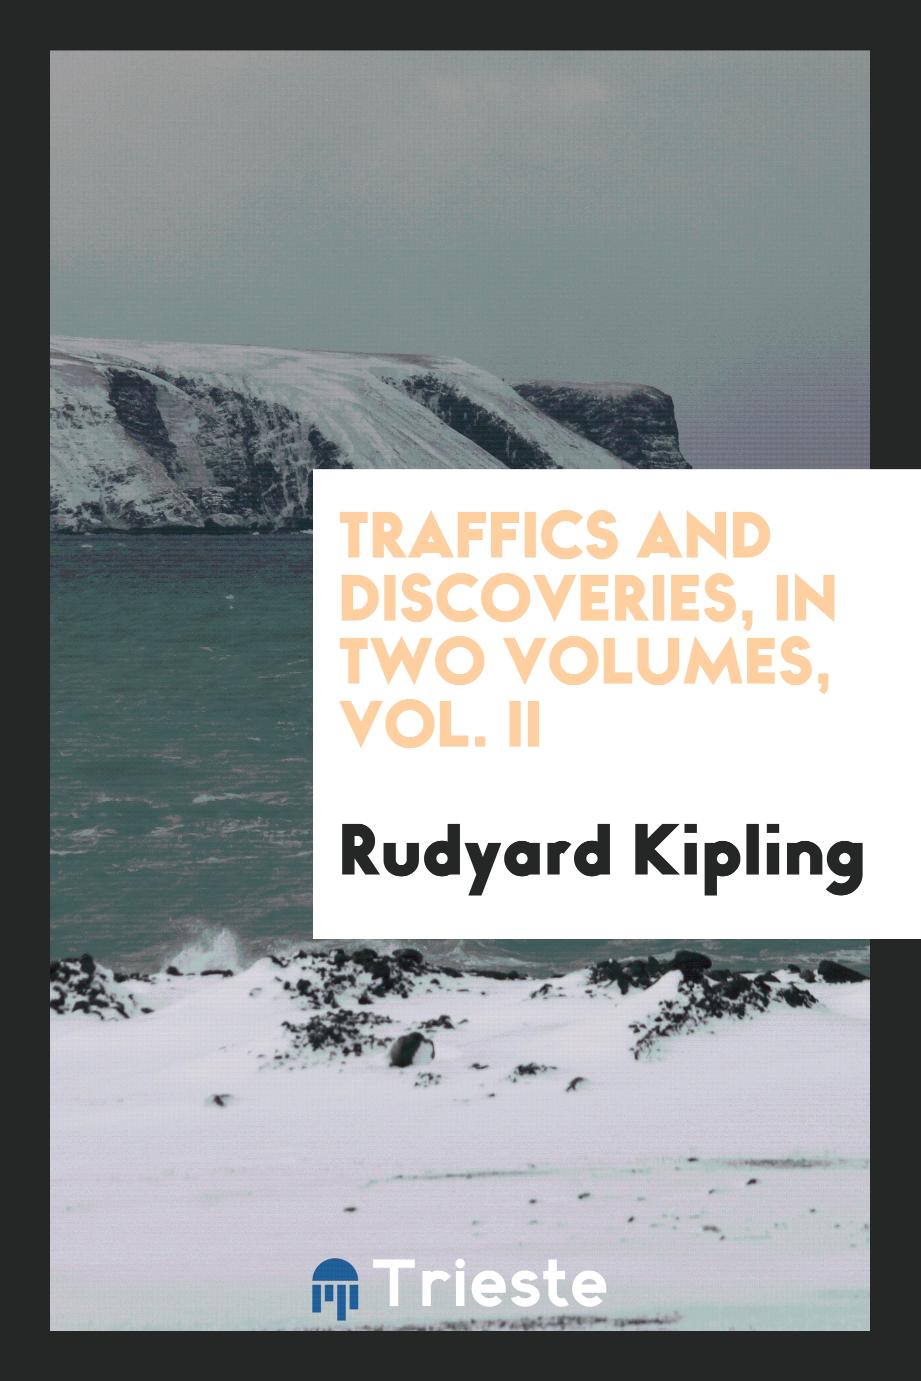 Traffics and discoveries, in two volumes, Vol. II